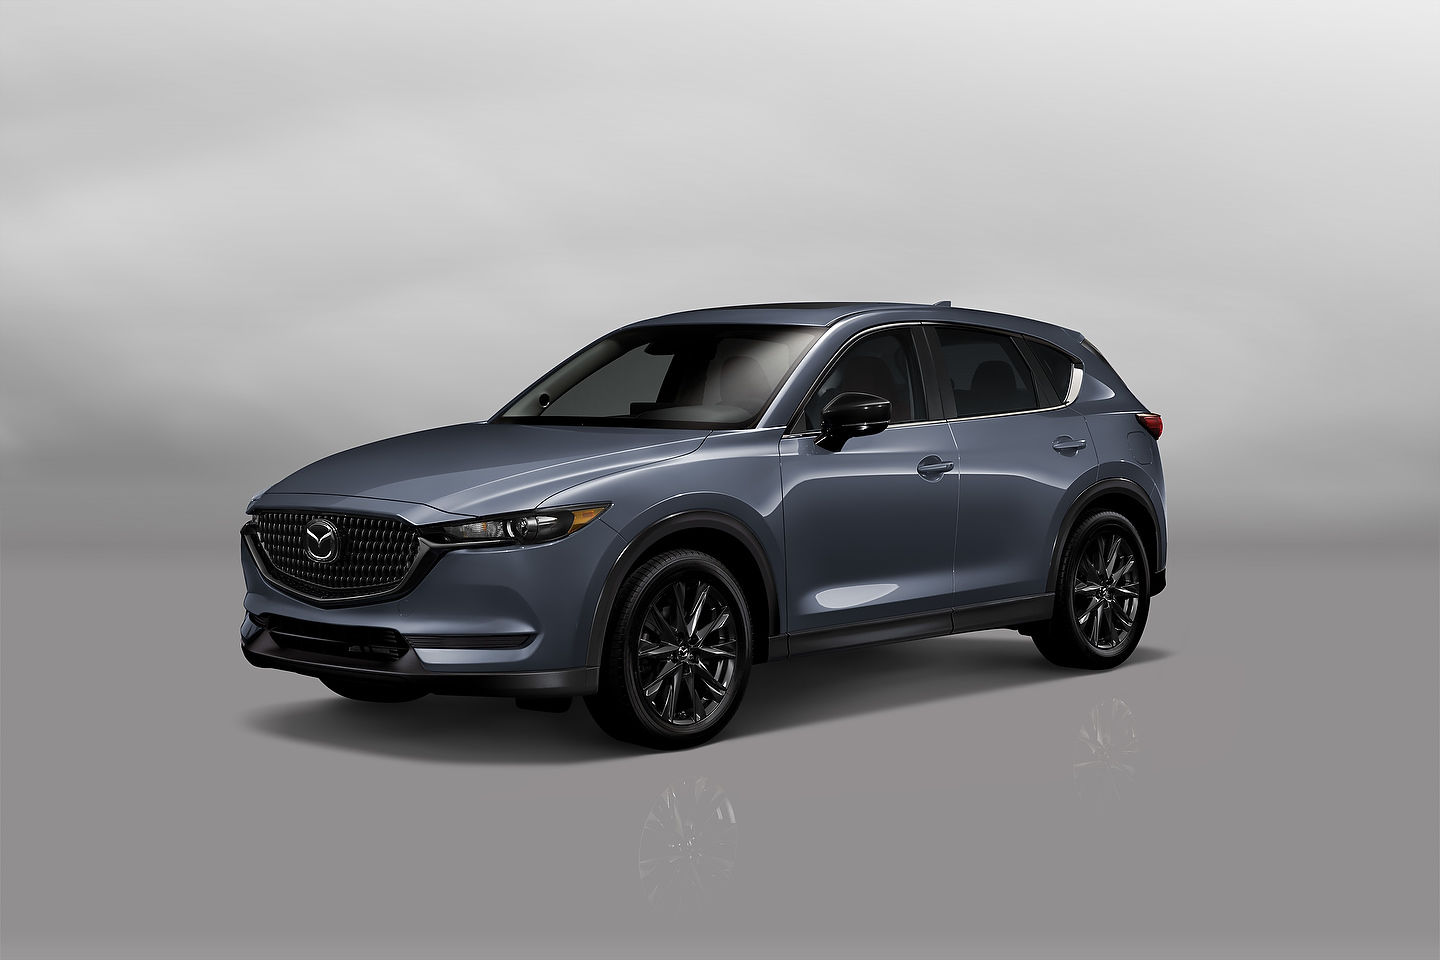 2021 Mazda CX-5 Price and Trims Overview